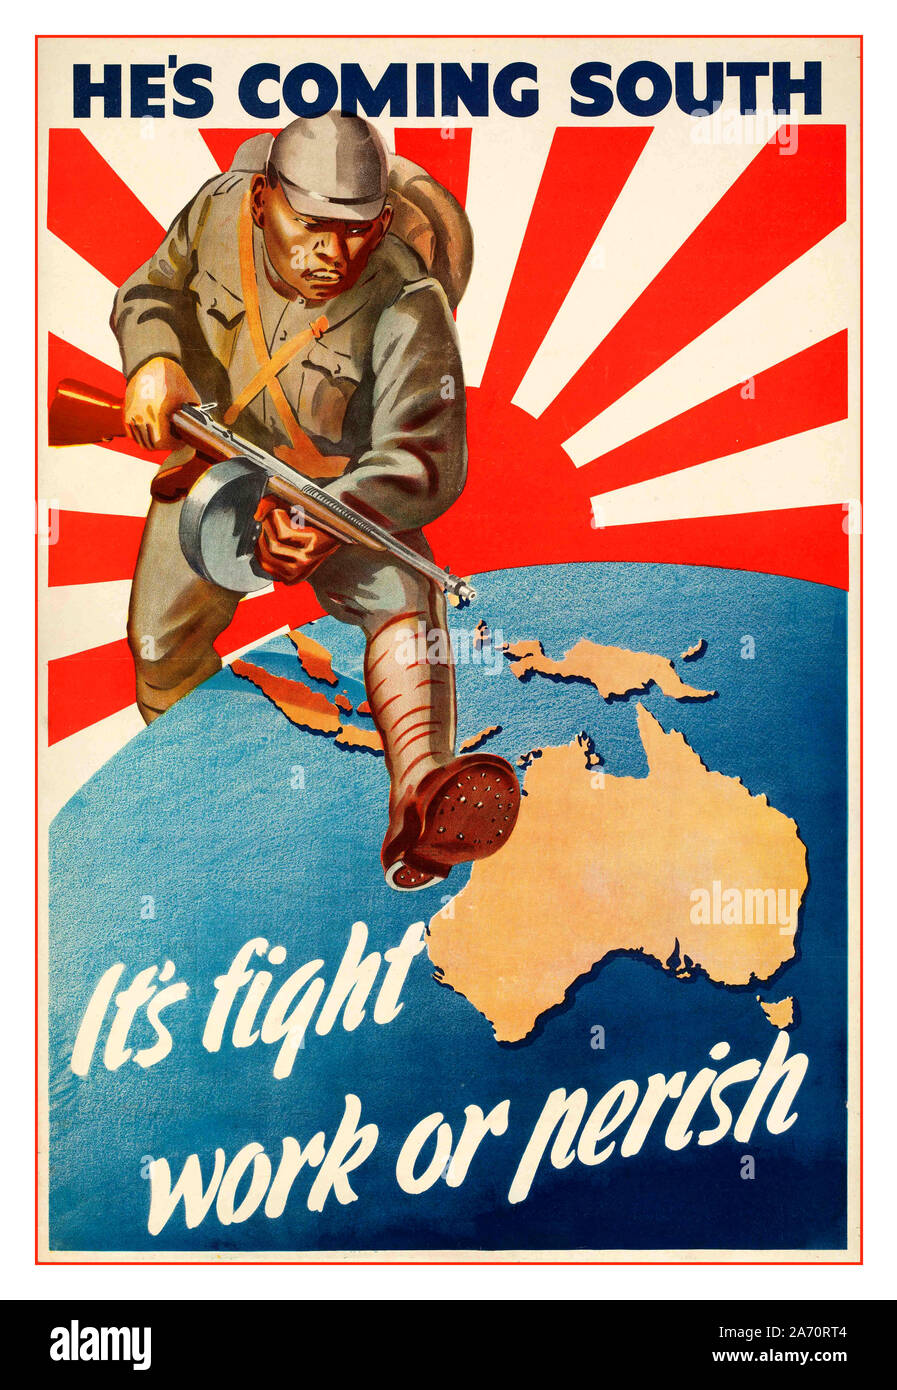 Vintage WW2 ‘He’s Coming South’ Australian 1942  propaganda poster. ‘It’s Fight Work or Perish’ Australia feared invasion by Imperial Japan following the Fall of Singapore. Illustration of Japanese soldier with Rising Sun Flag emblem behind striding over Australia map World War II Second World War Stock Photo